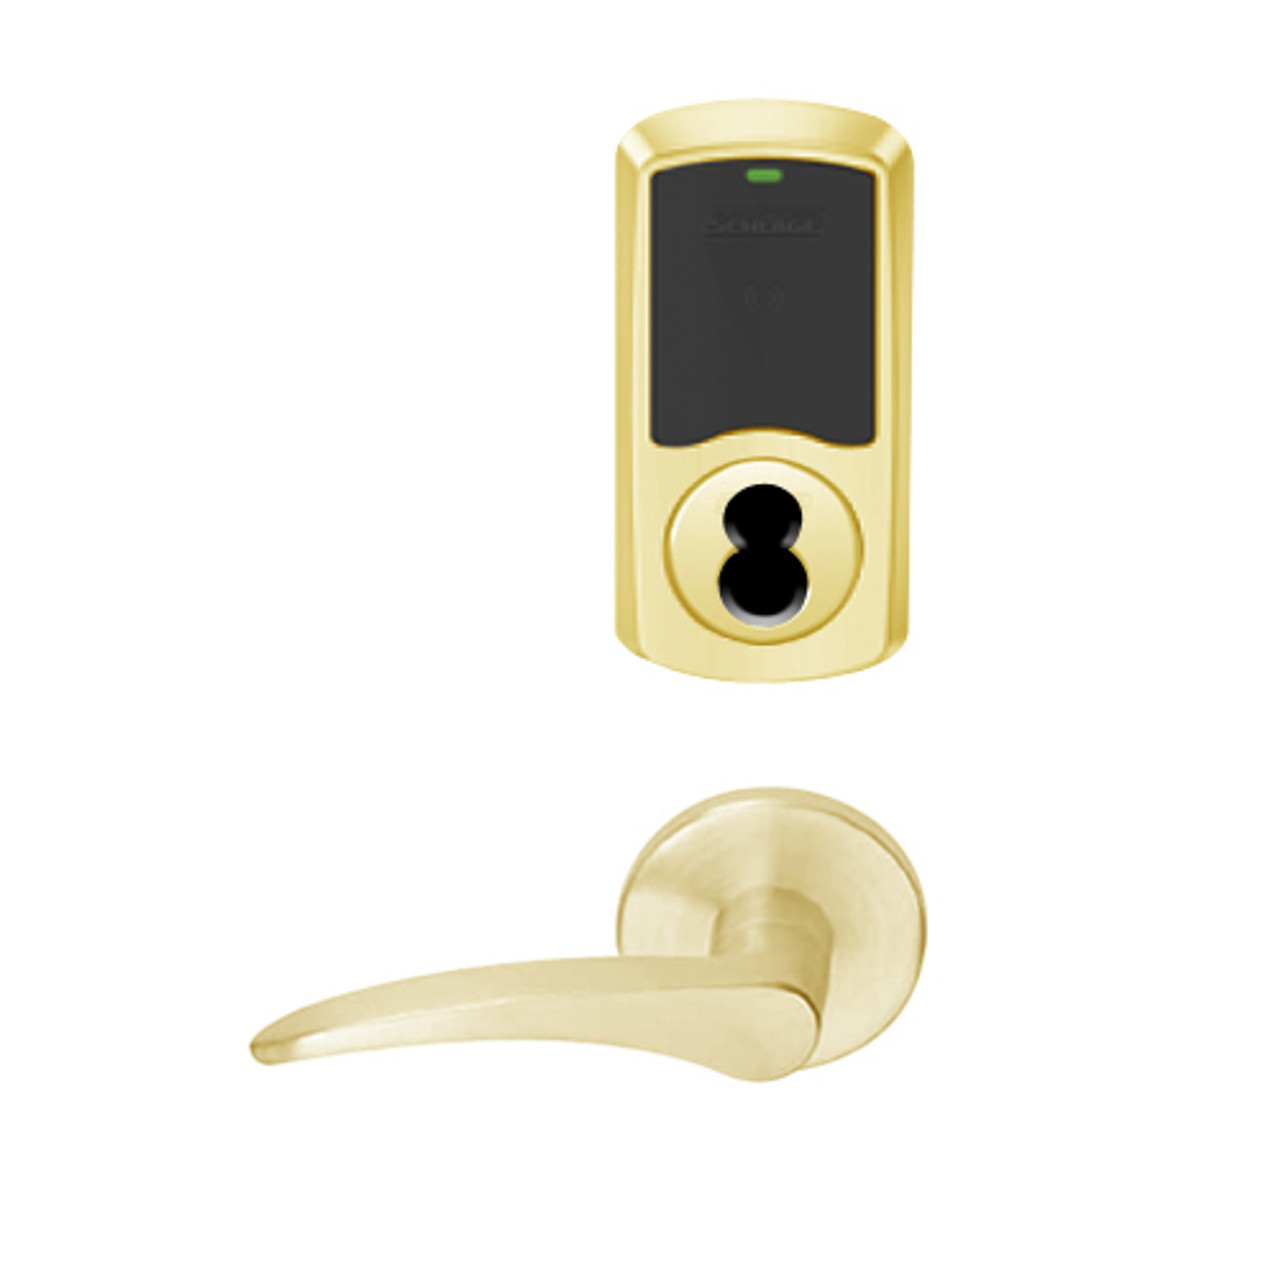 LEMS-GRW-BD-12-605-00C-LH Schlage Storeroom Wireless Greenwich Mortise Lock with LED Indicator and 12 Lever Prepped for SFIC in Bright Brass